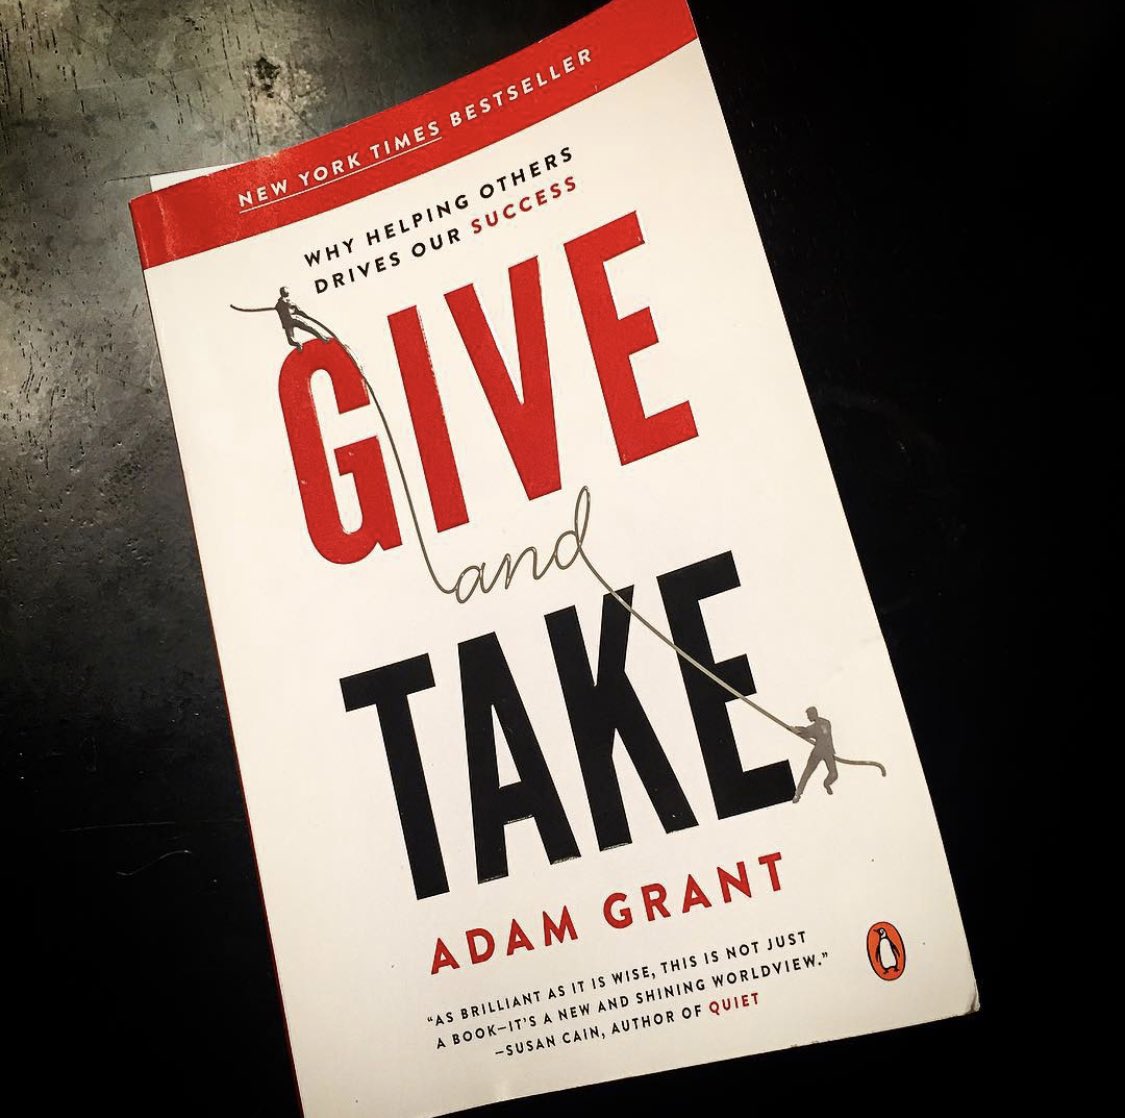 8/ Be a Giver, Not a Taker: Do for others without expecting anything in return.There are 3 types of people; givers, takers, & matchers.Givers do whatever they can, whenever they can, because they can, to help others. It’s that simple.Instead of credit, we must win together.